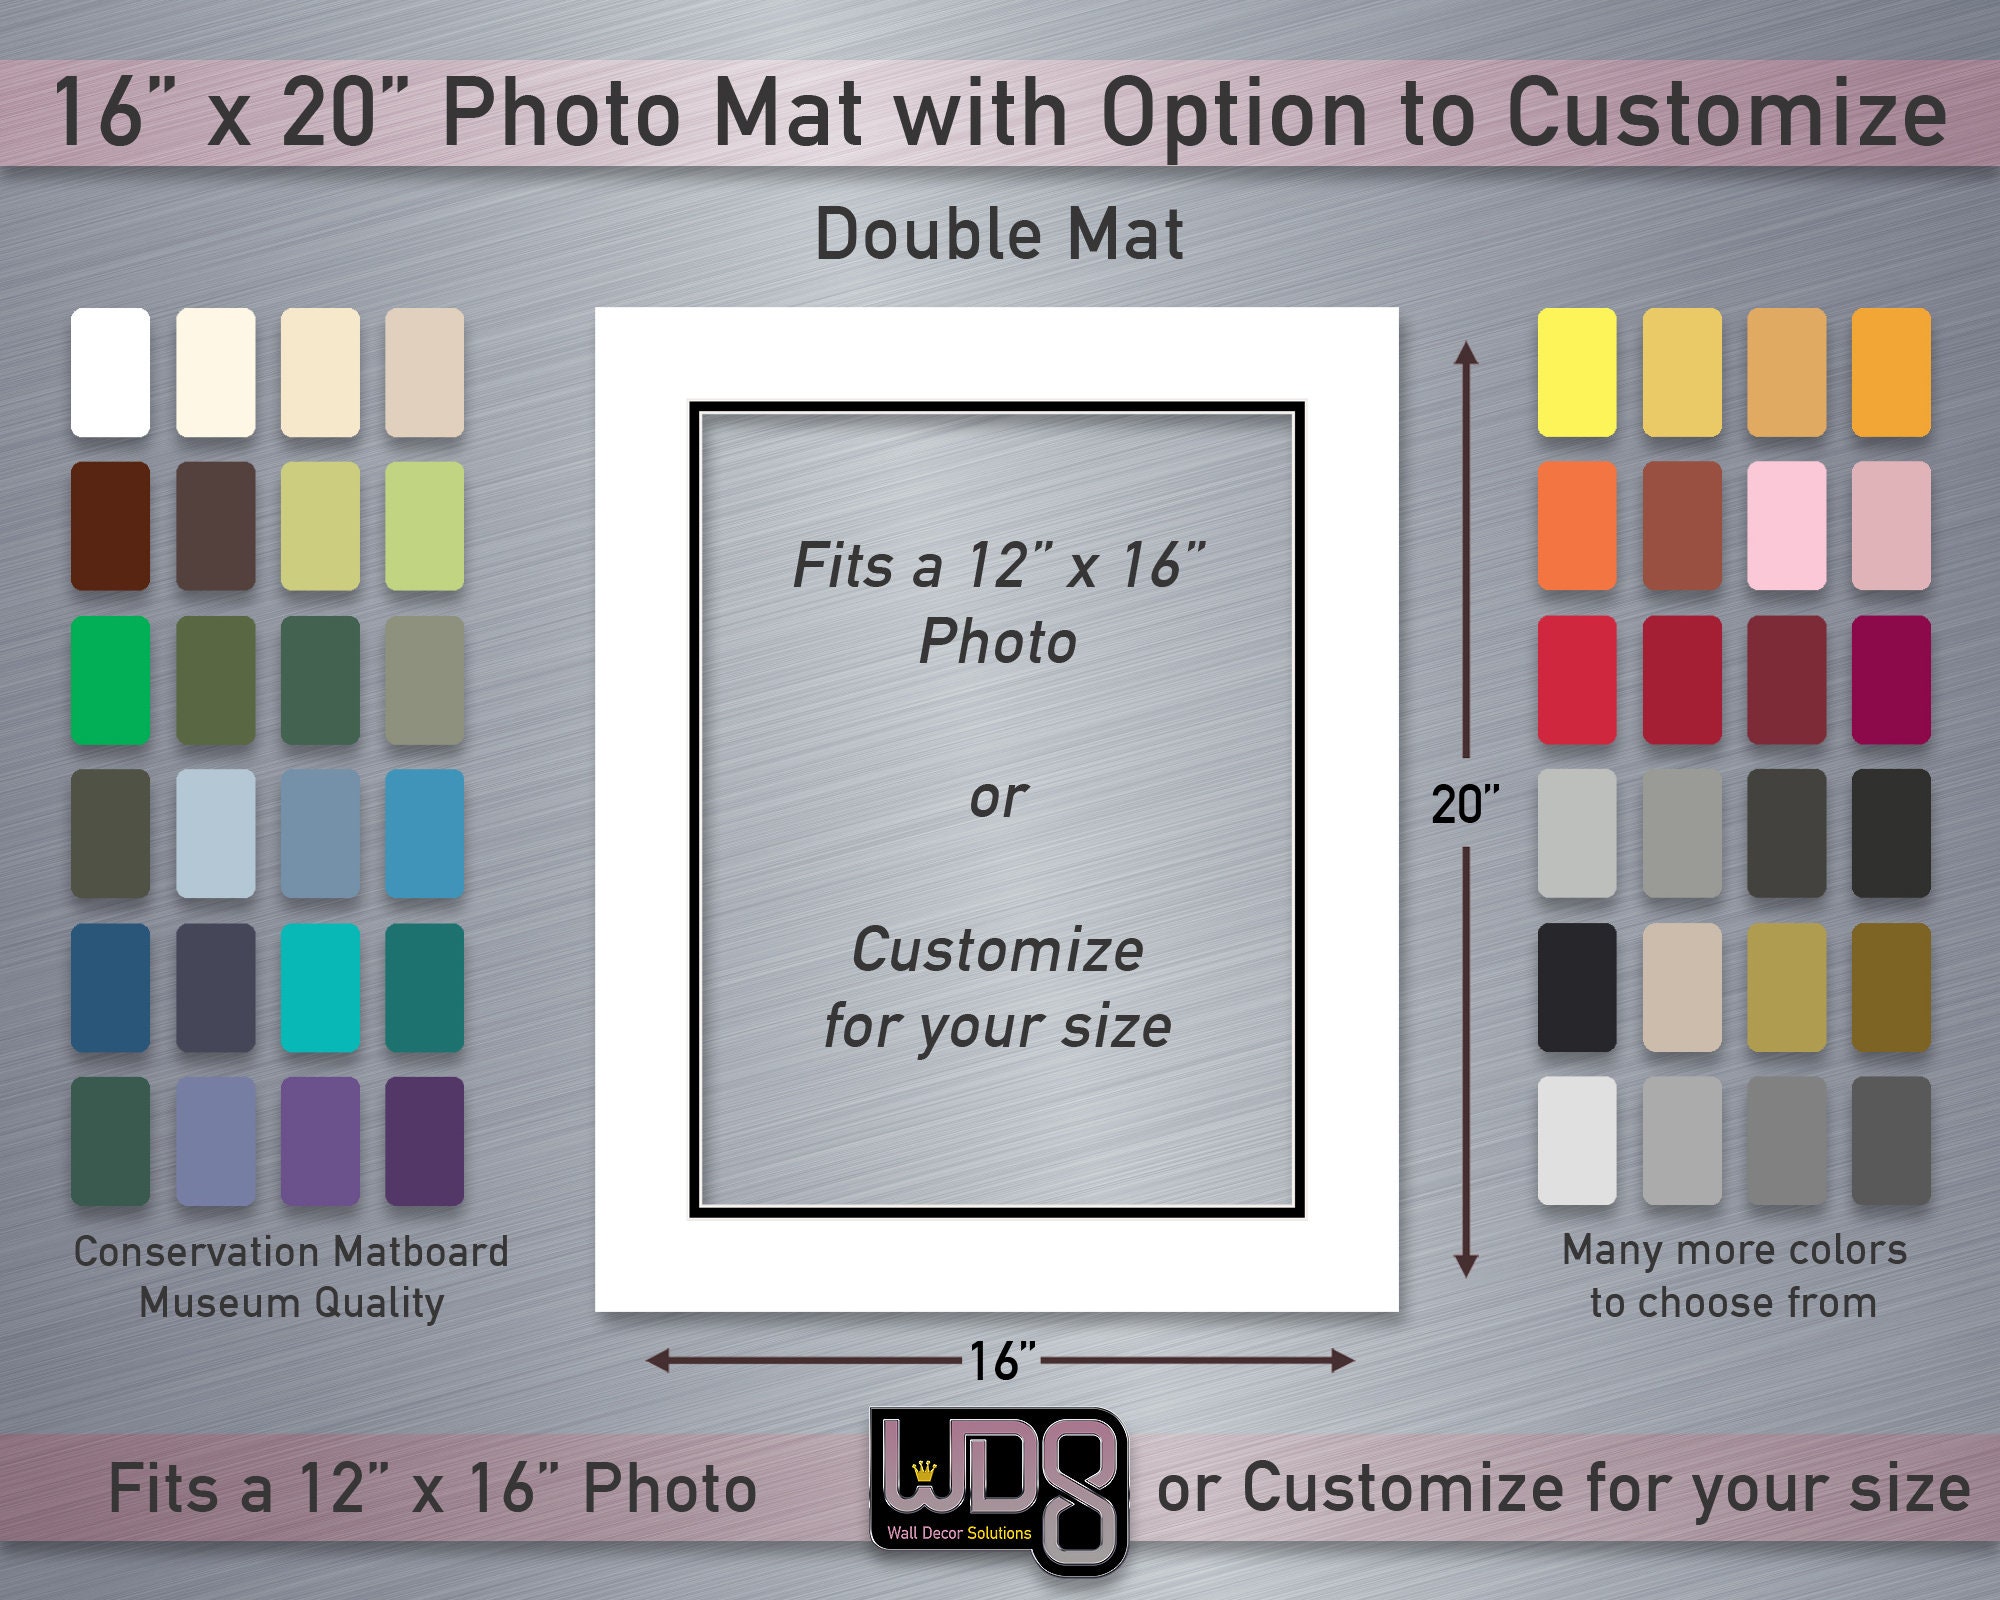 Pack of Ten 12x16 Mats Bevel Cut for 11x12 Photos - Acid Free Dark Purple Precut Matboards for Pictures, Photos, Framing